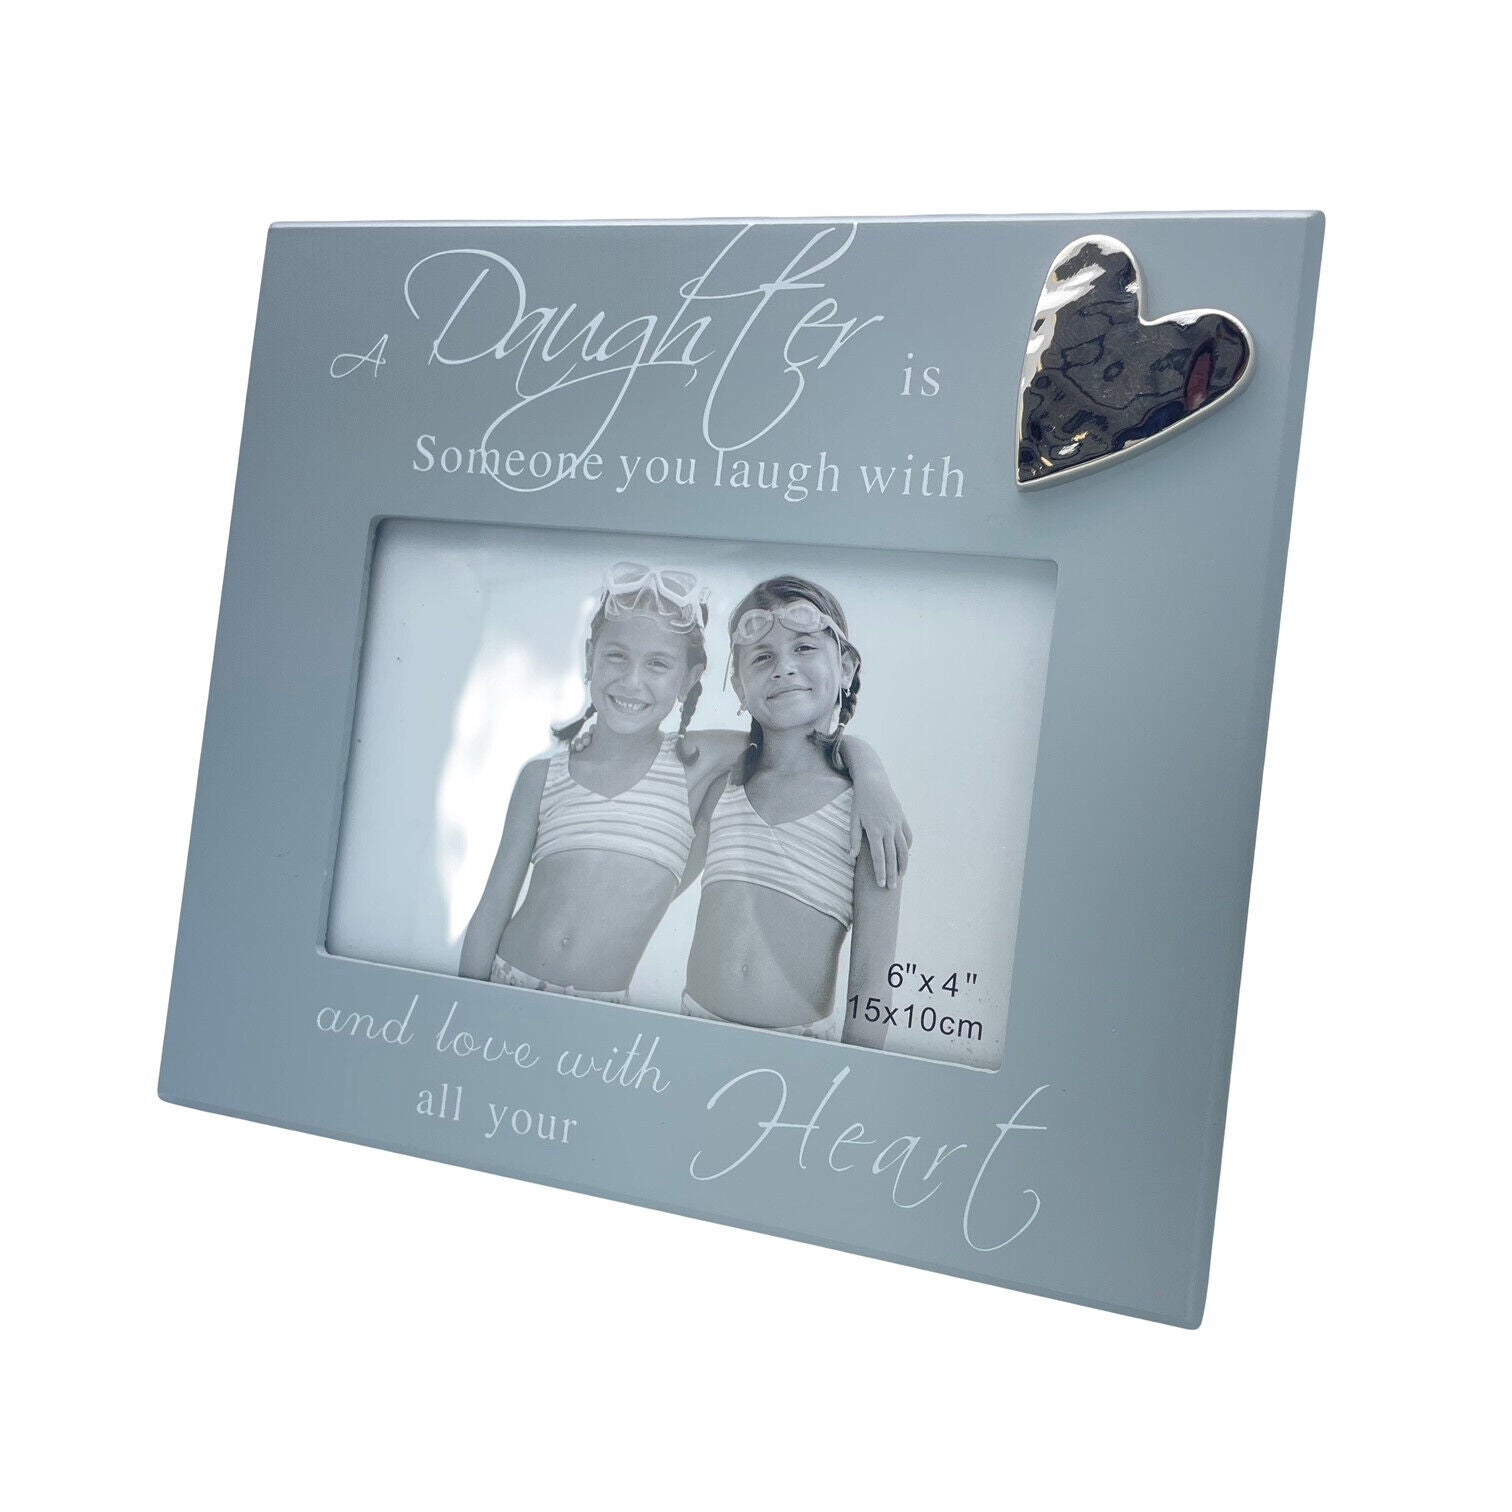 Daughter Photo Frame In Grey Wood Holds 4 x 6 Inch Photo